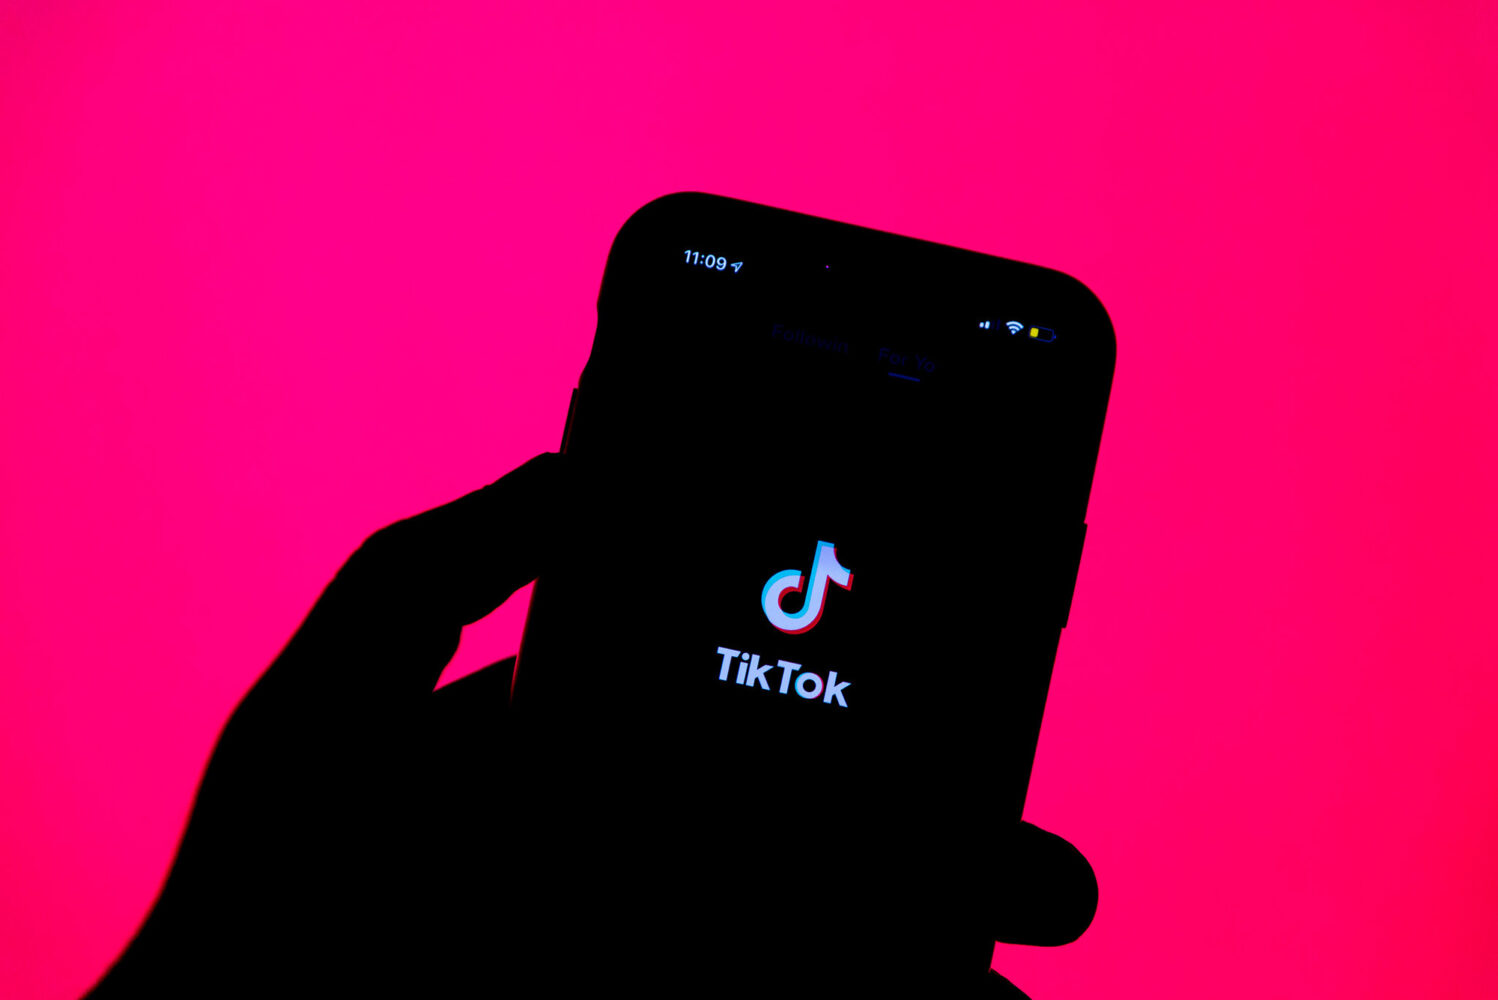 Photo: A stock image of a person holding a iPhone with a TikTok image on it and a bright pink background.